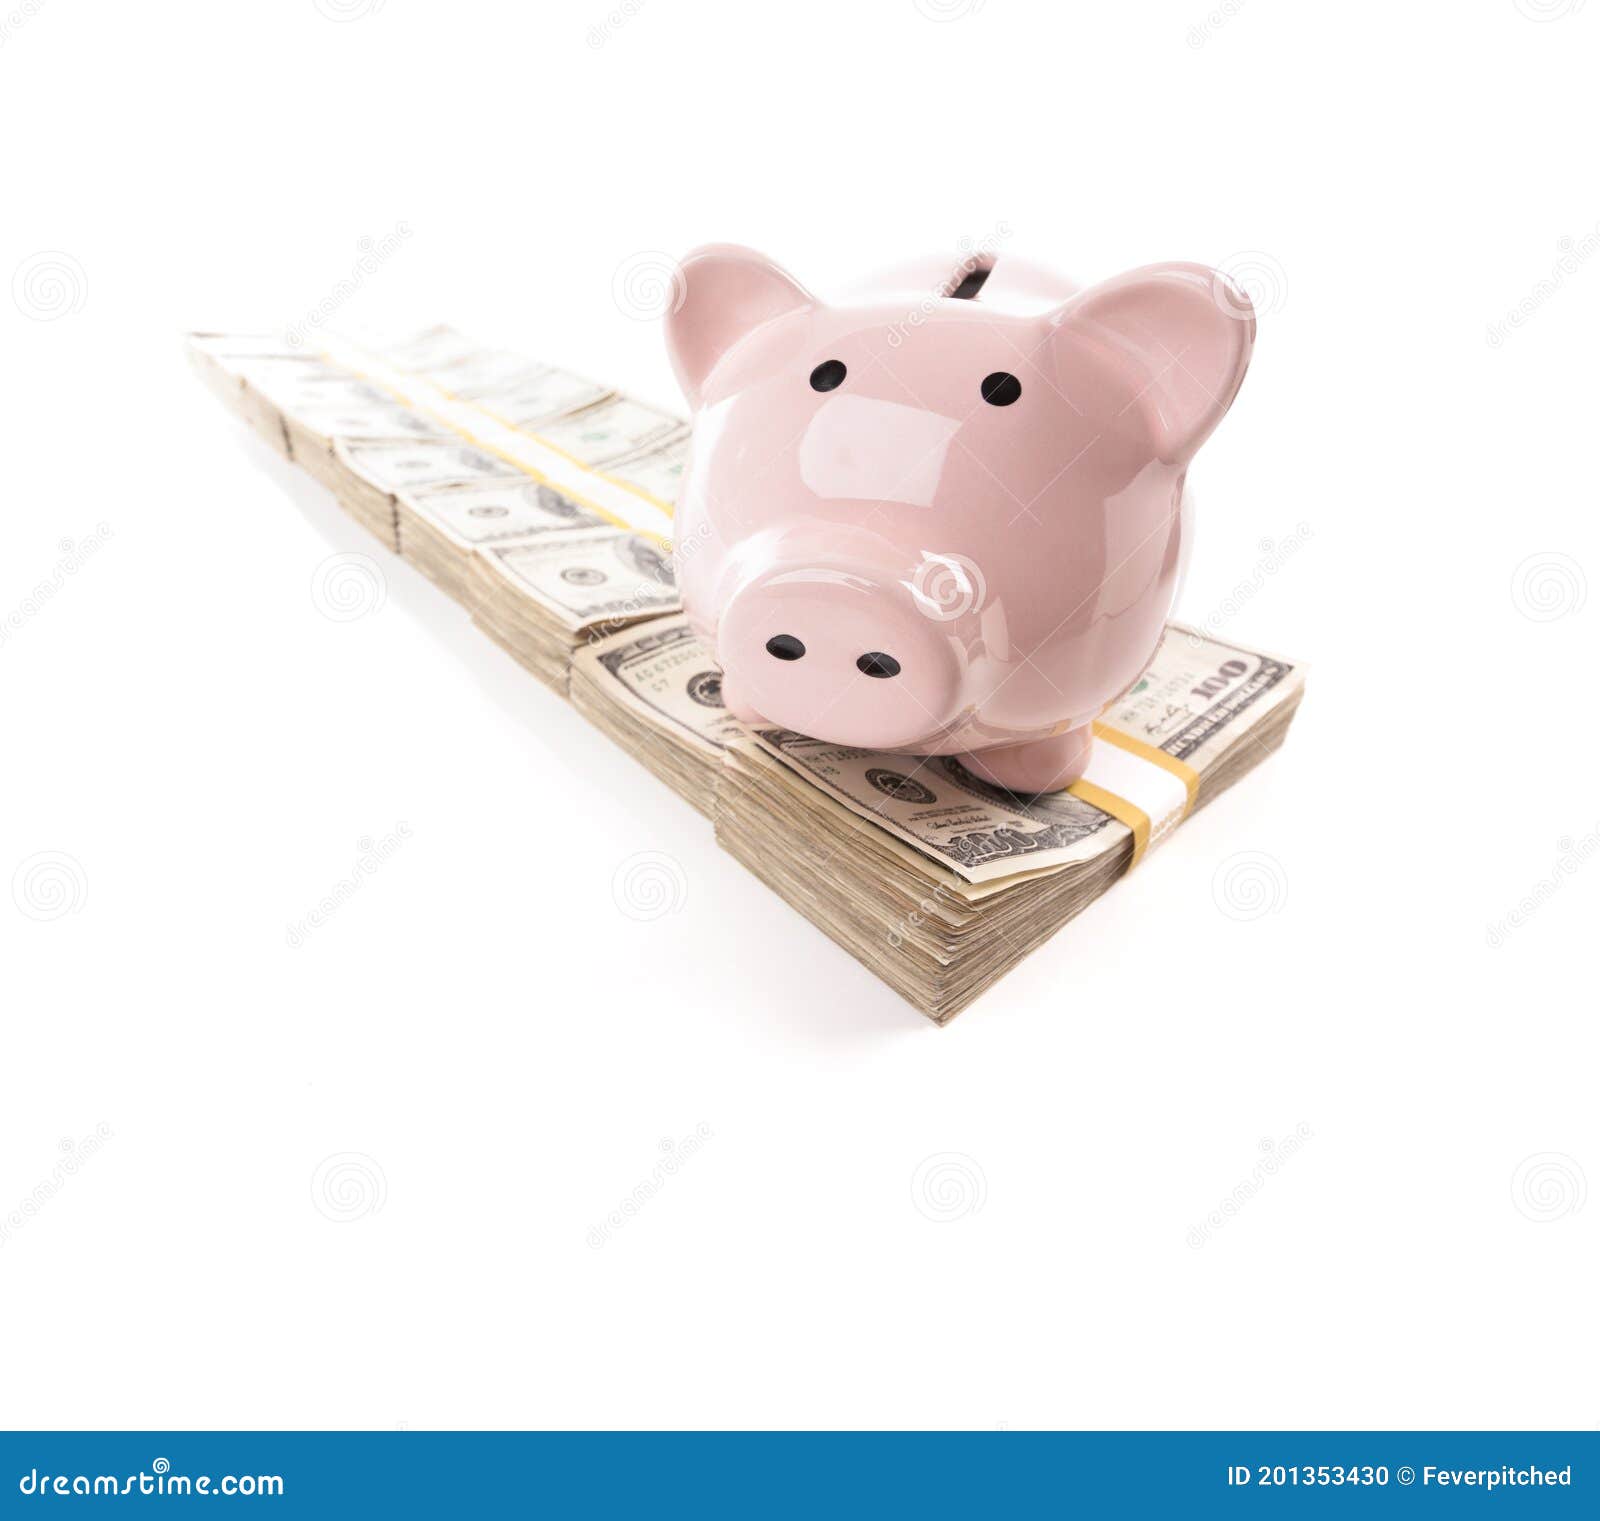 pink piggy bank on row of hundreds of dollars stacks  on a white background